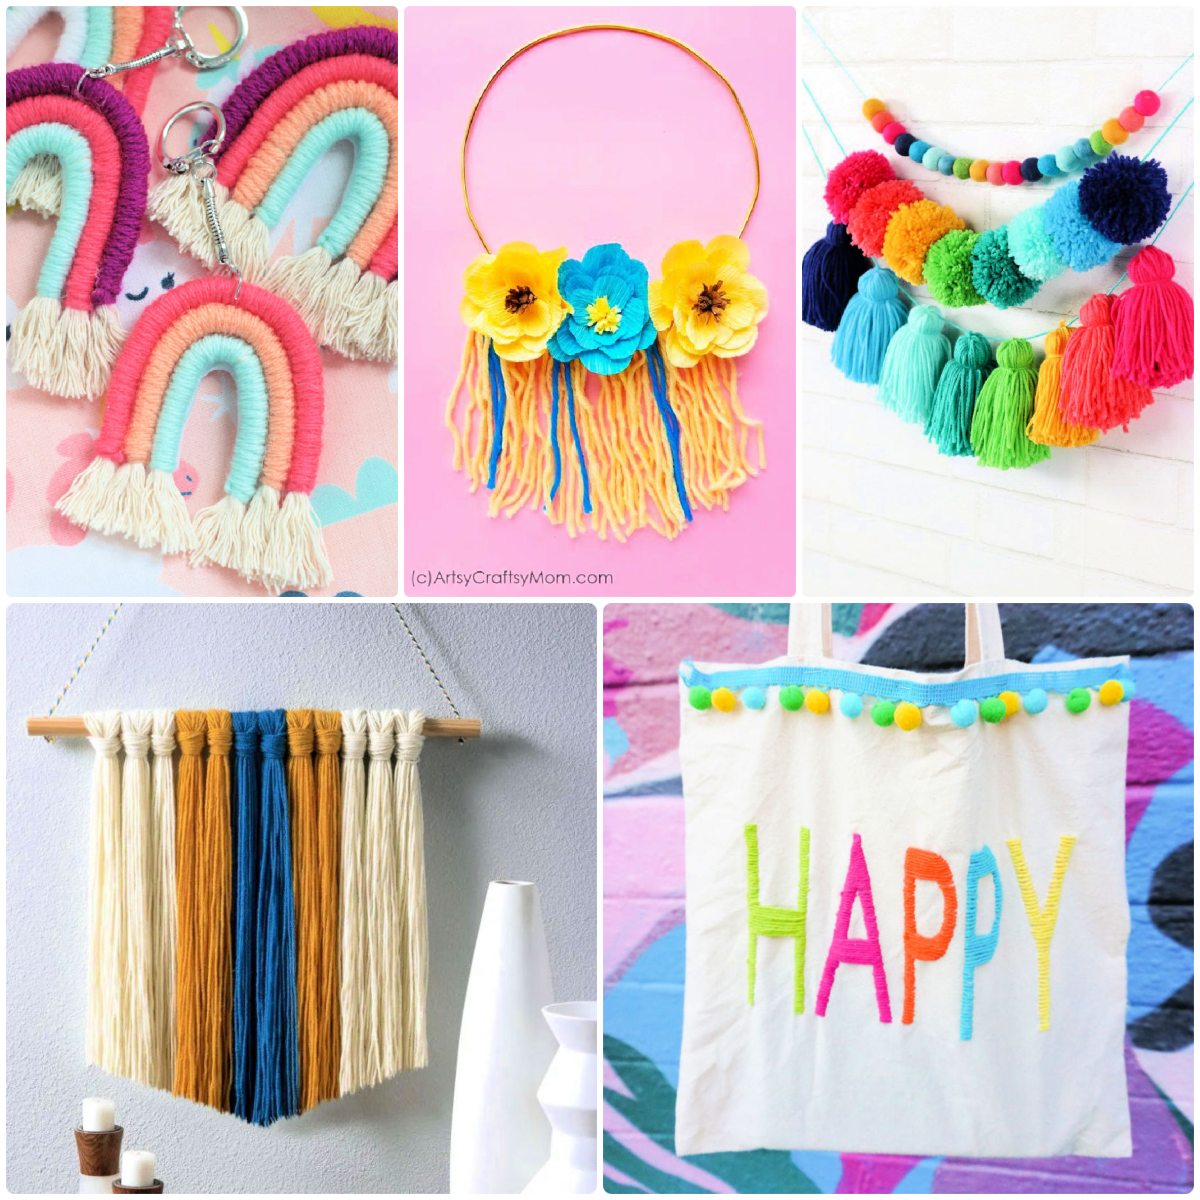 30 Easy Yarn Crafts for Make Creative Things - Craftulate